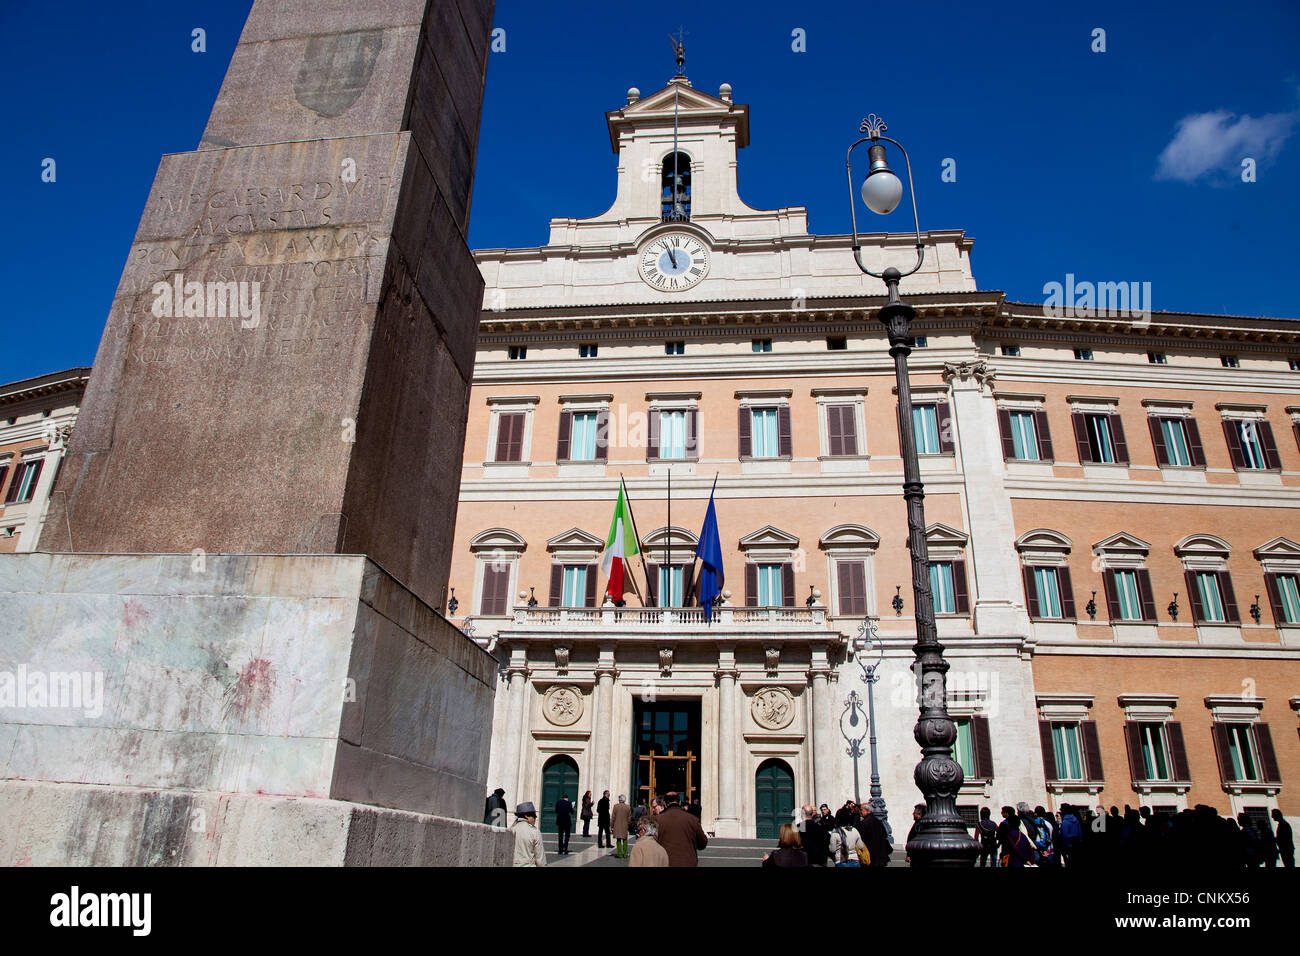 City view of Rome, Italy with old buildings, monuments, art. Palazzo Montecitorio, the seat of the Italian Chamber of Deputies Stock Photo